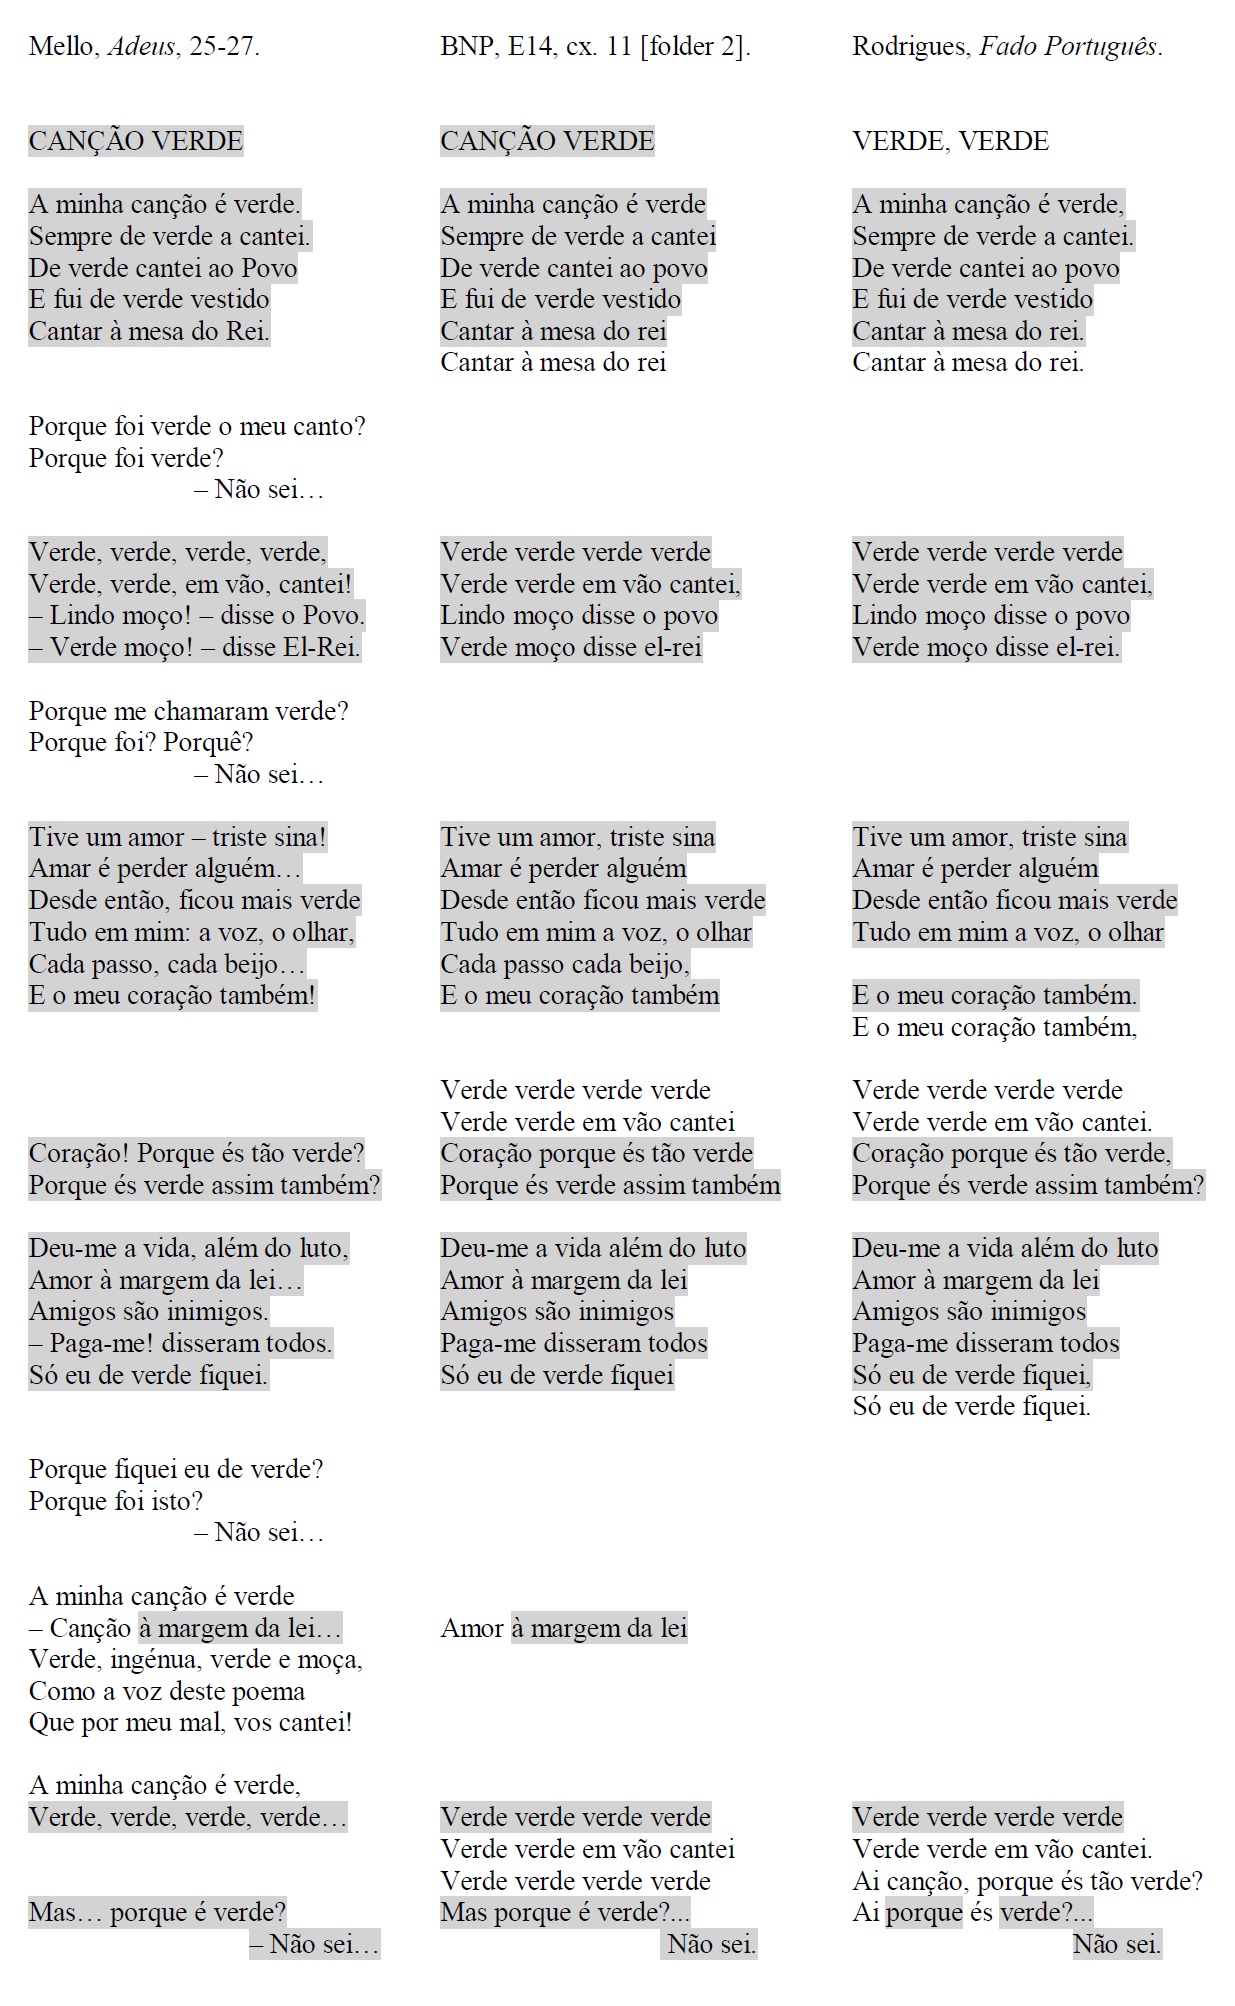 Figure 5: Side-by-side comparison of the poem “Canção verde,” an intermediate adaptive revision by composer Alain Oulman, and a musical adaptation interpreted by Amália Rodrigues. Gray: text common to all versions.